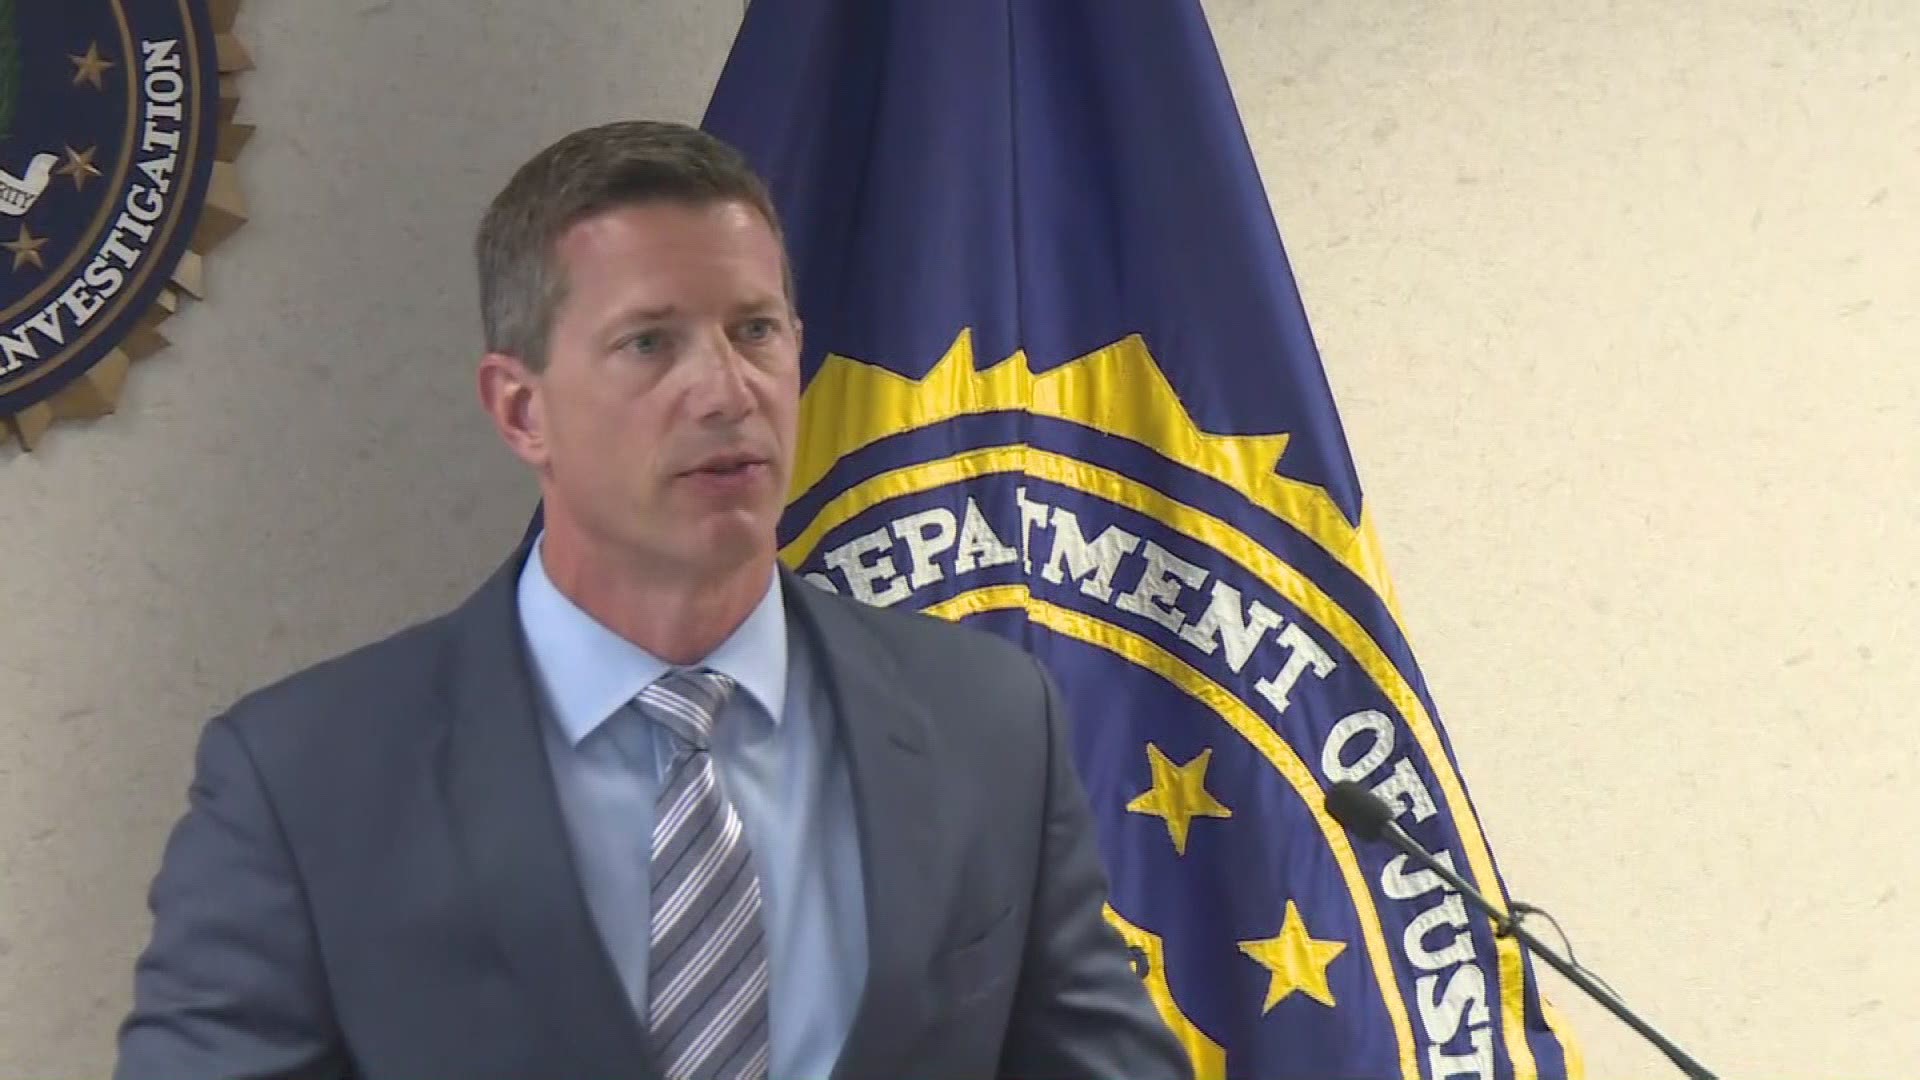 FBI S.A. Eric Smith asks for the public's help in solving a double-homicide that occurred in Rocky River Reservation June 4. Two people were shot in the head.